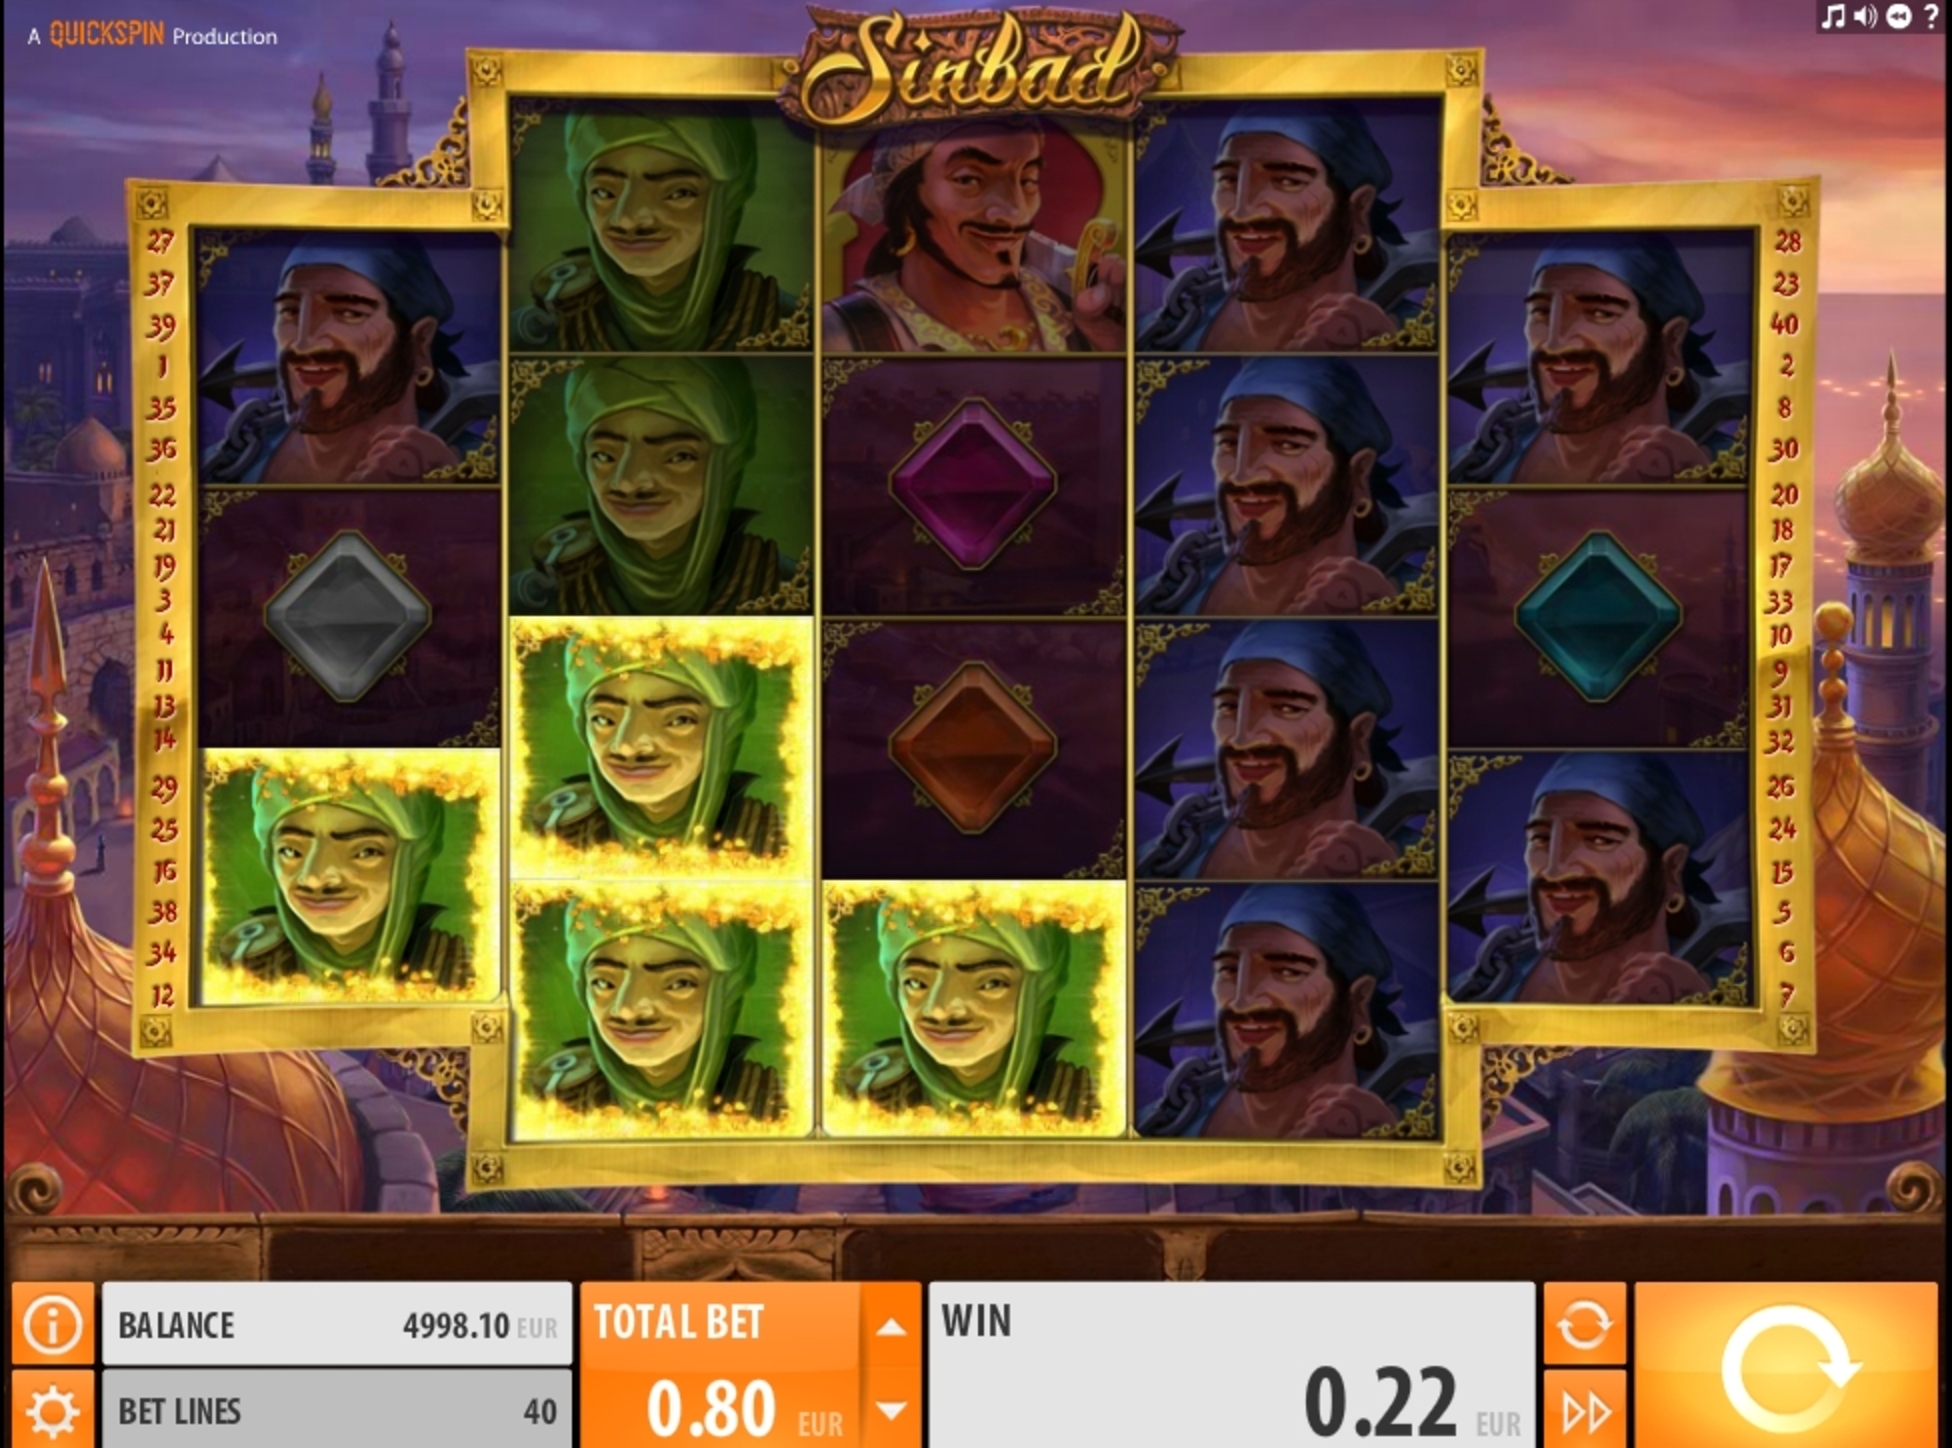 Win Money in Sinbad Free Slot Game by Quickspin